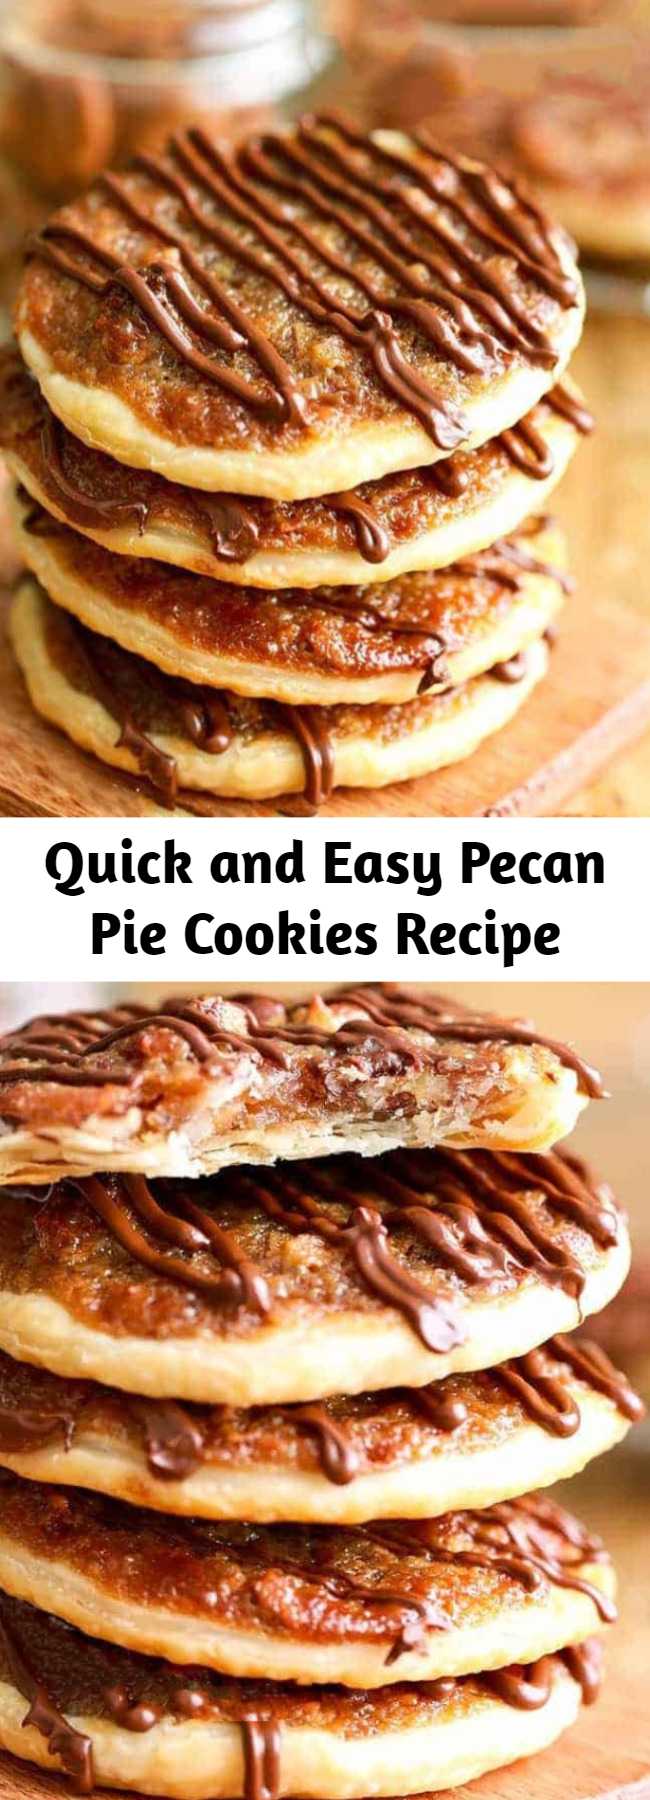 Quick and Easy Pecan Pie Cookies Recipe - Pecan Pie Cookies have a thin flaky crust with a layer of the amazing nutty caramely pecan pie filling we love so much! These are the perfect cookies for any occasion!